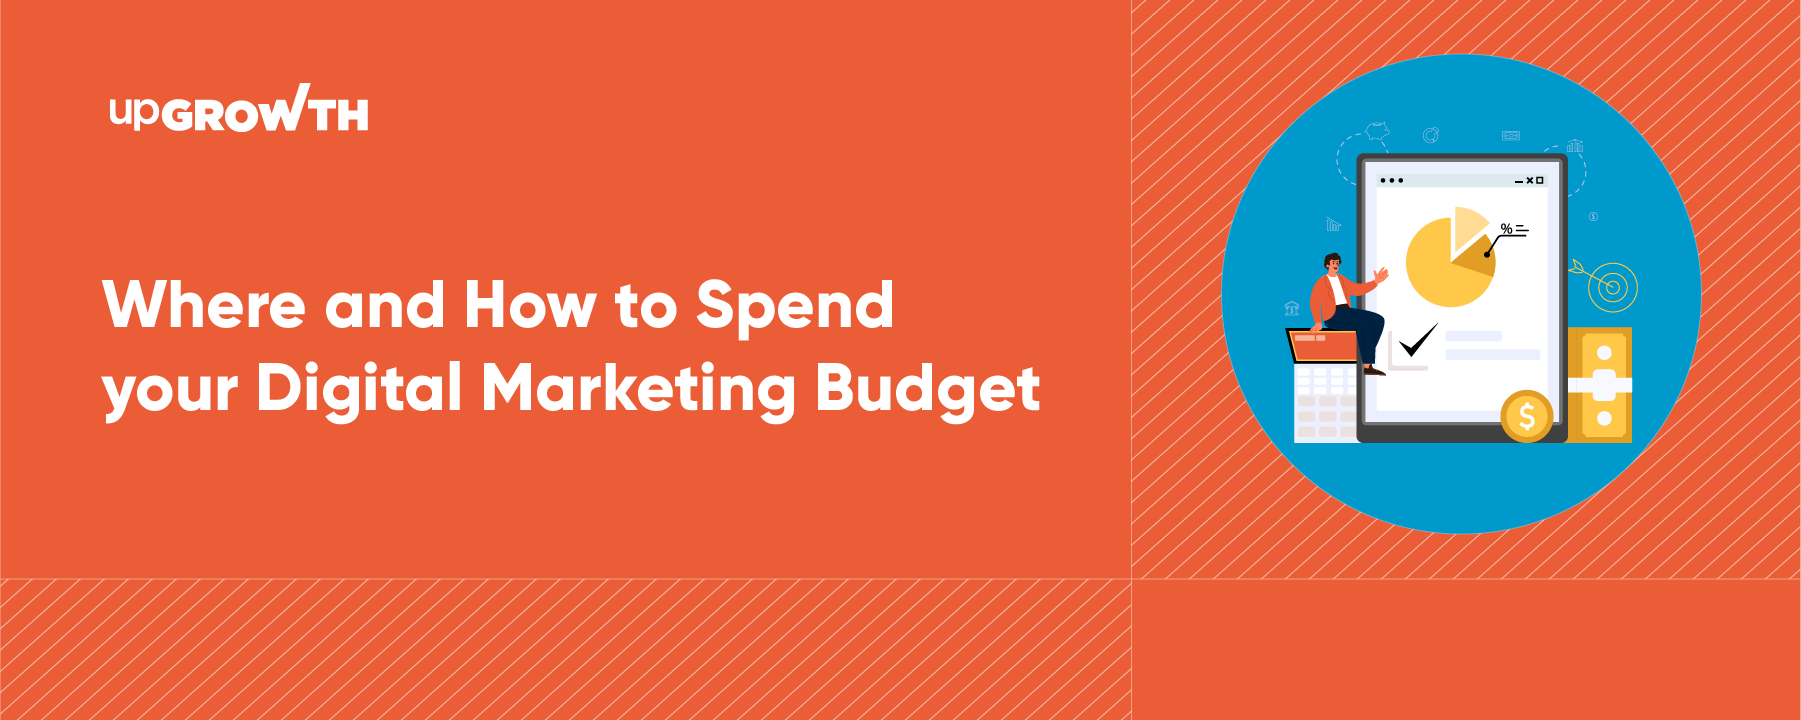 Where and How to Spend your Digital Marketing Budget